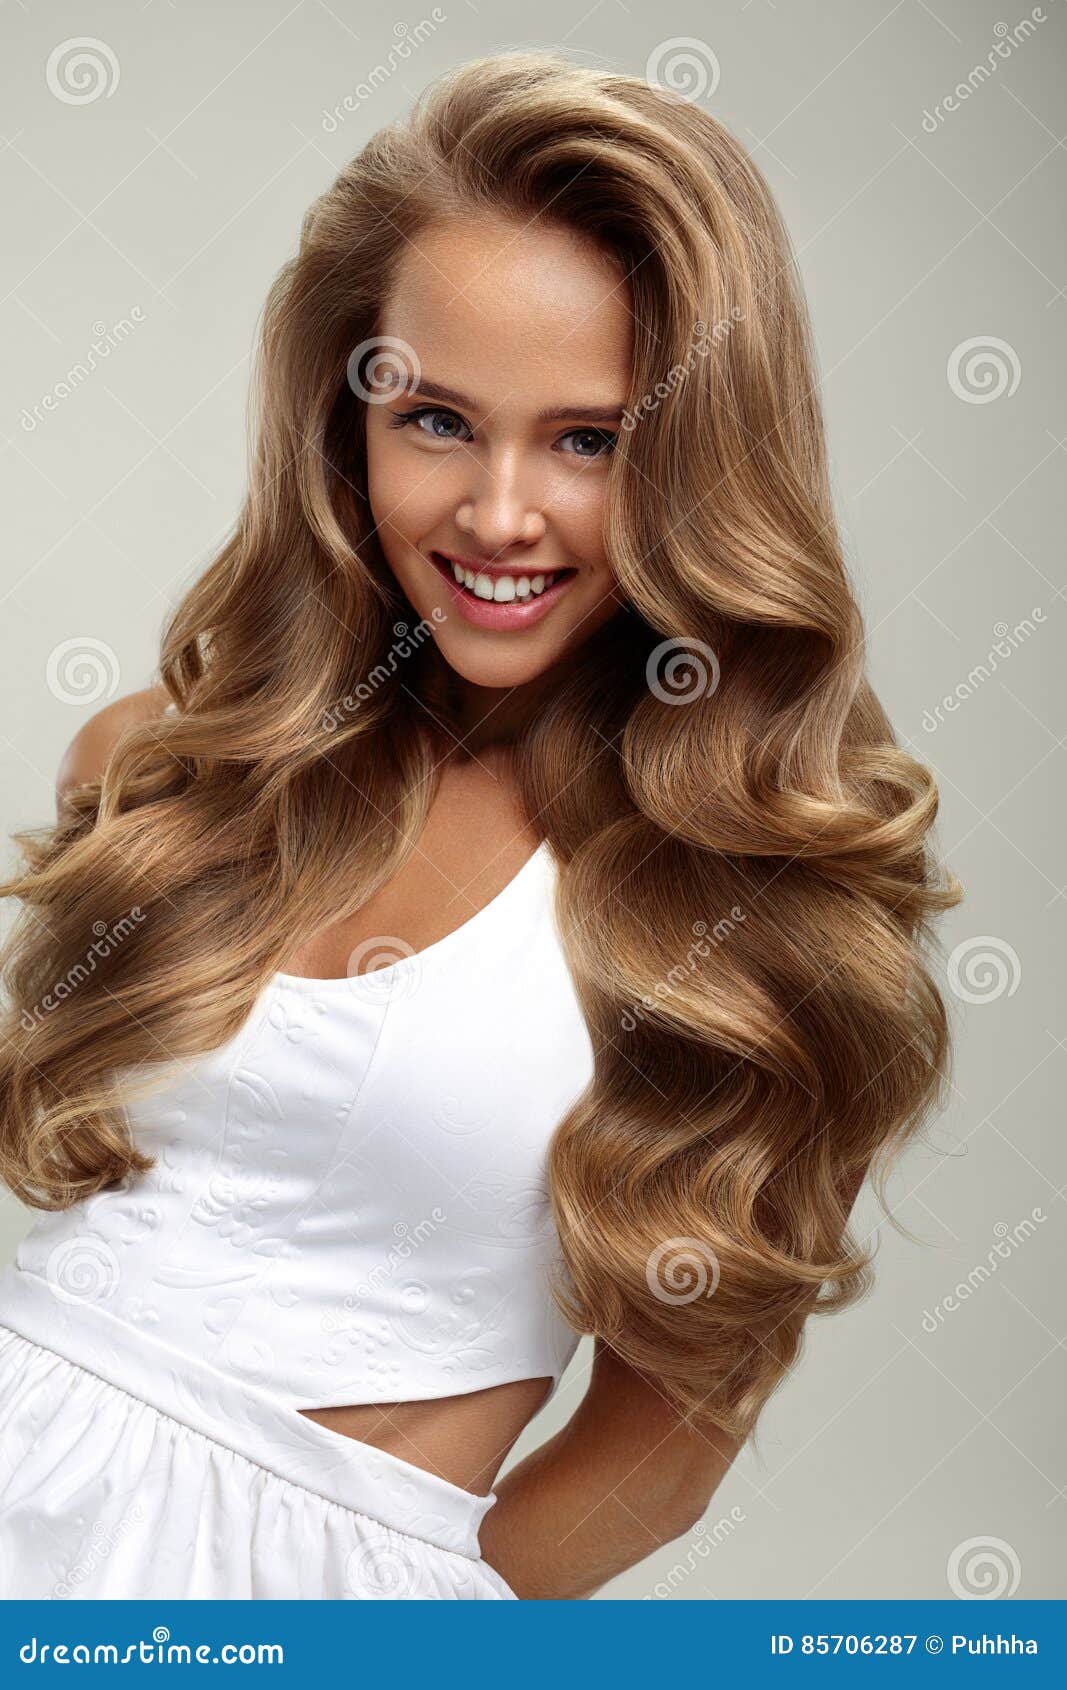 Perfect Hair Beautiful Woman Model With Long Blonde Curly Hair